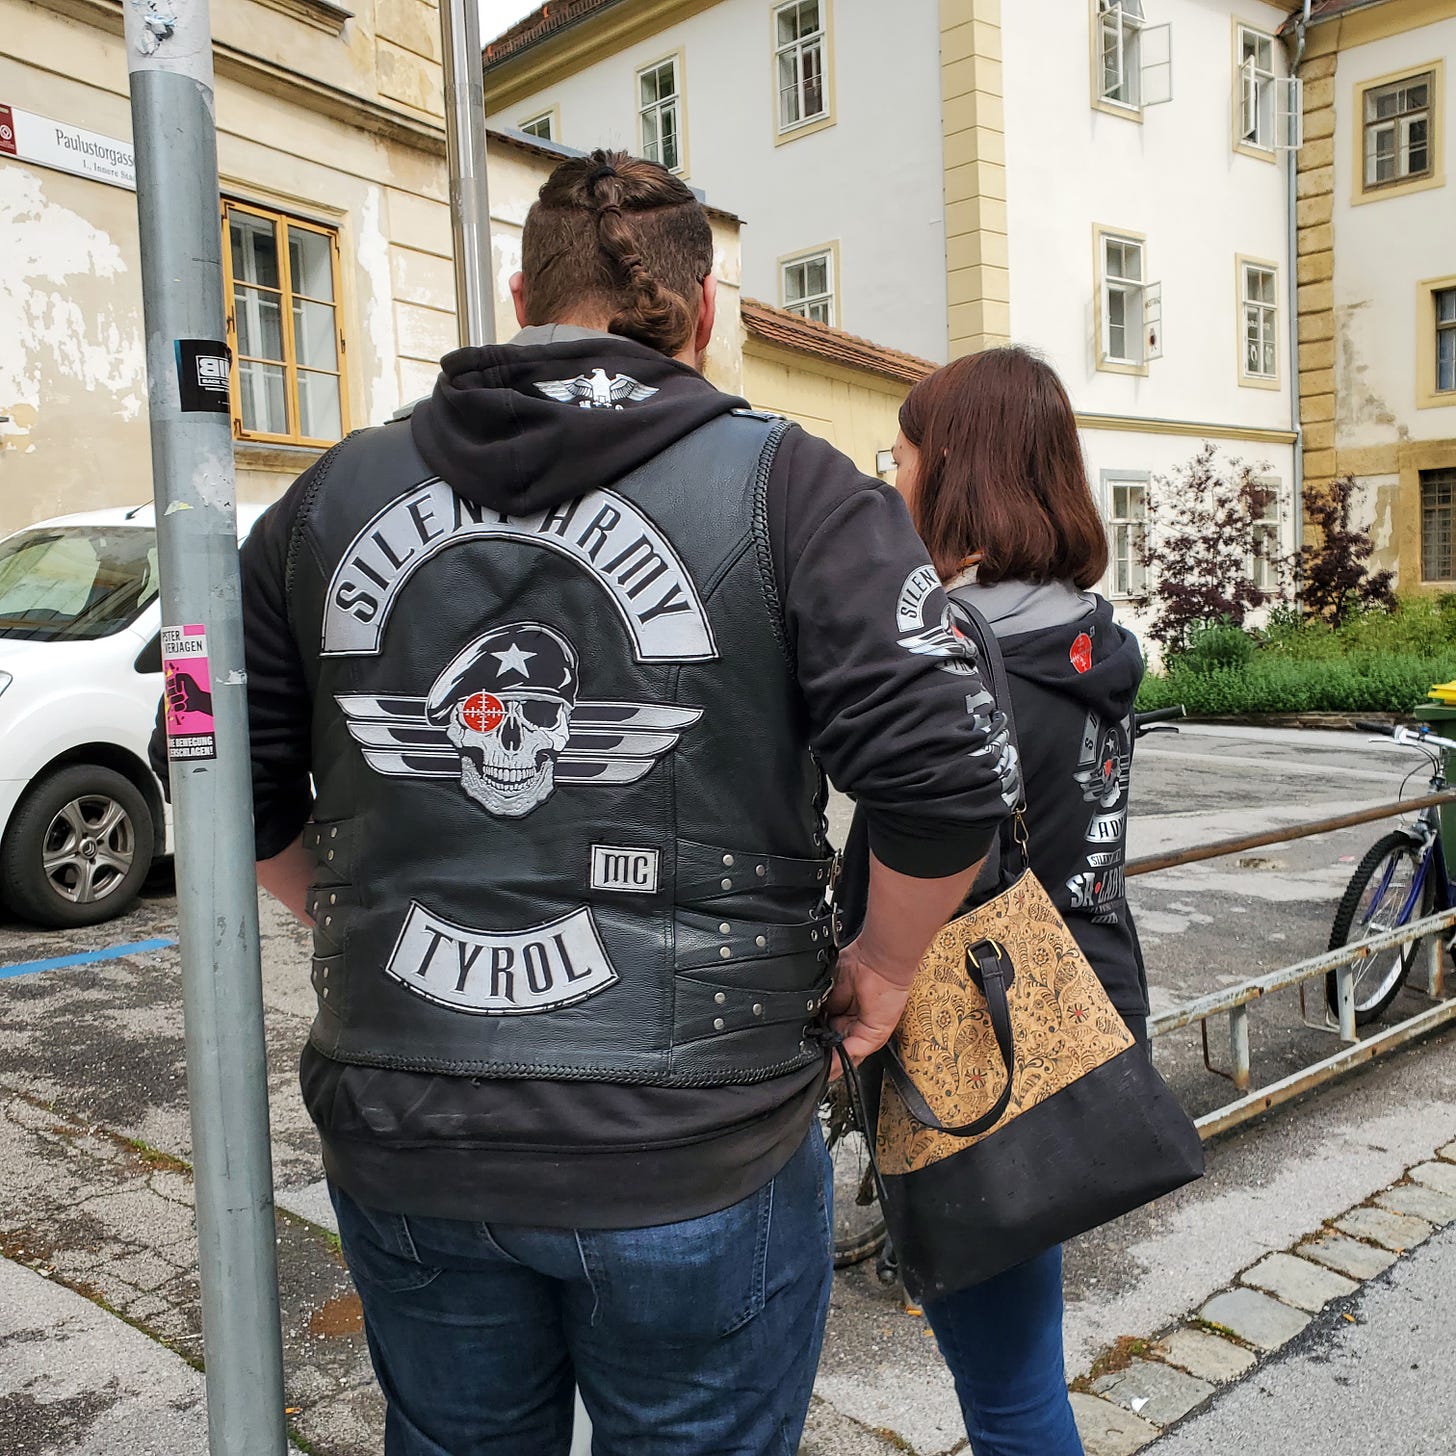 A heterosexual white couple both wearing “Silent Army Tyrol” jackets with Nazi-styled graphics and, on the man’s hoodie, an actual Nazi symbol.